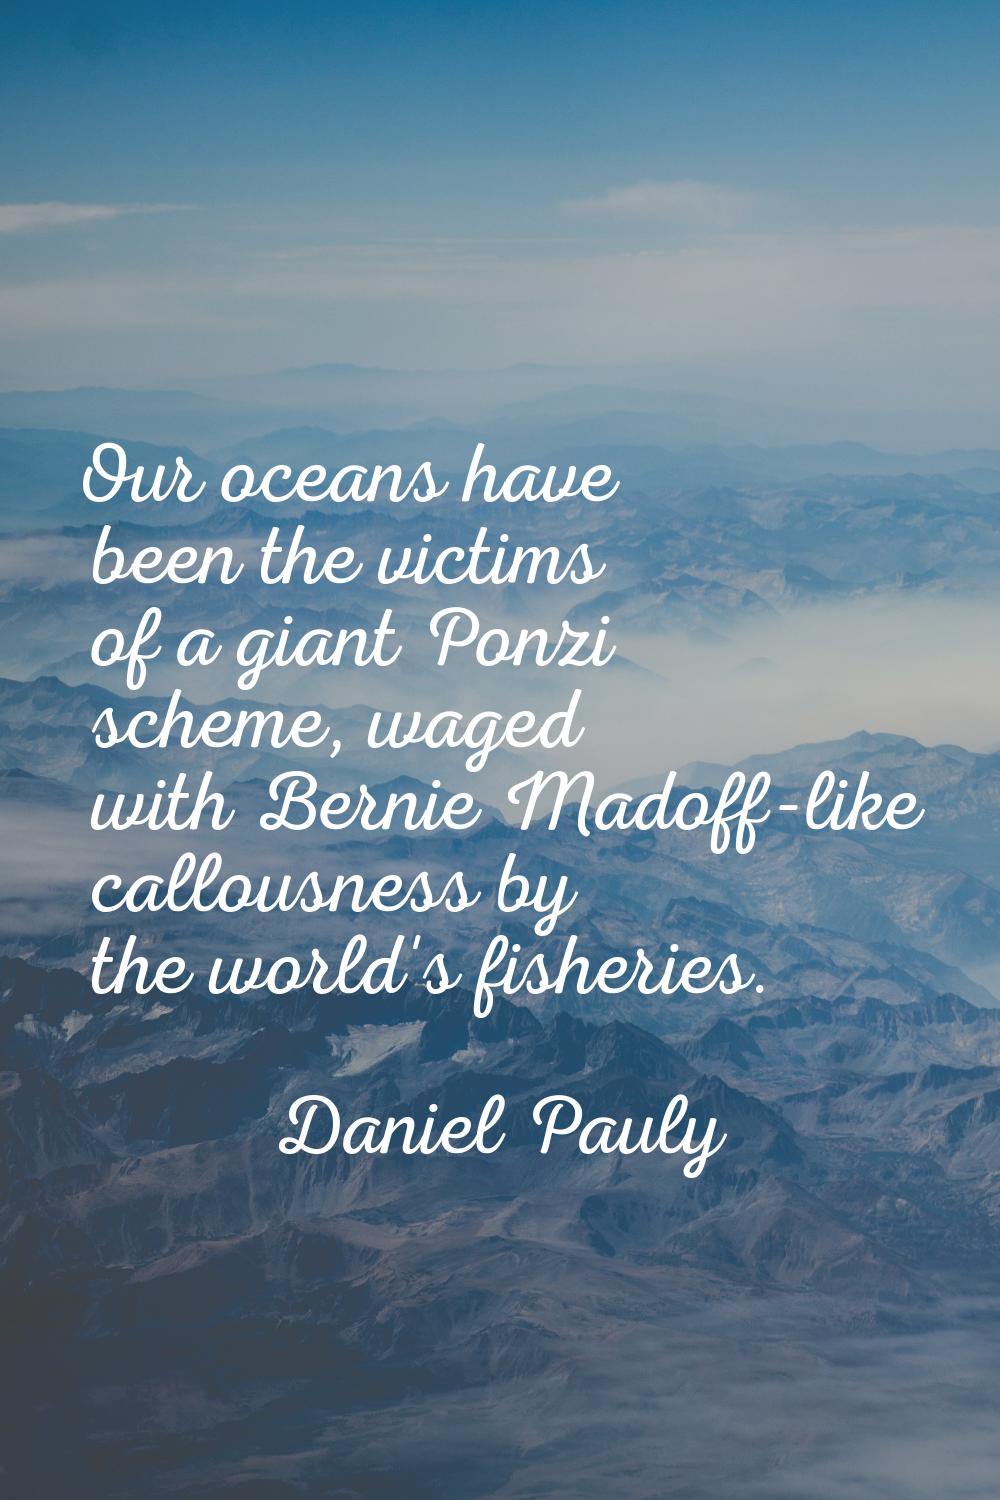 Our oceans have been the victims of a giant Ponzi scheme, waged with Bernie Madoff-like callousness